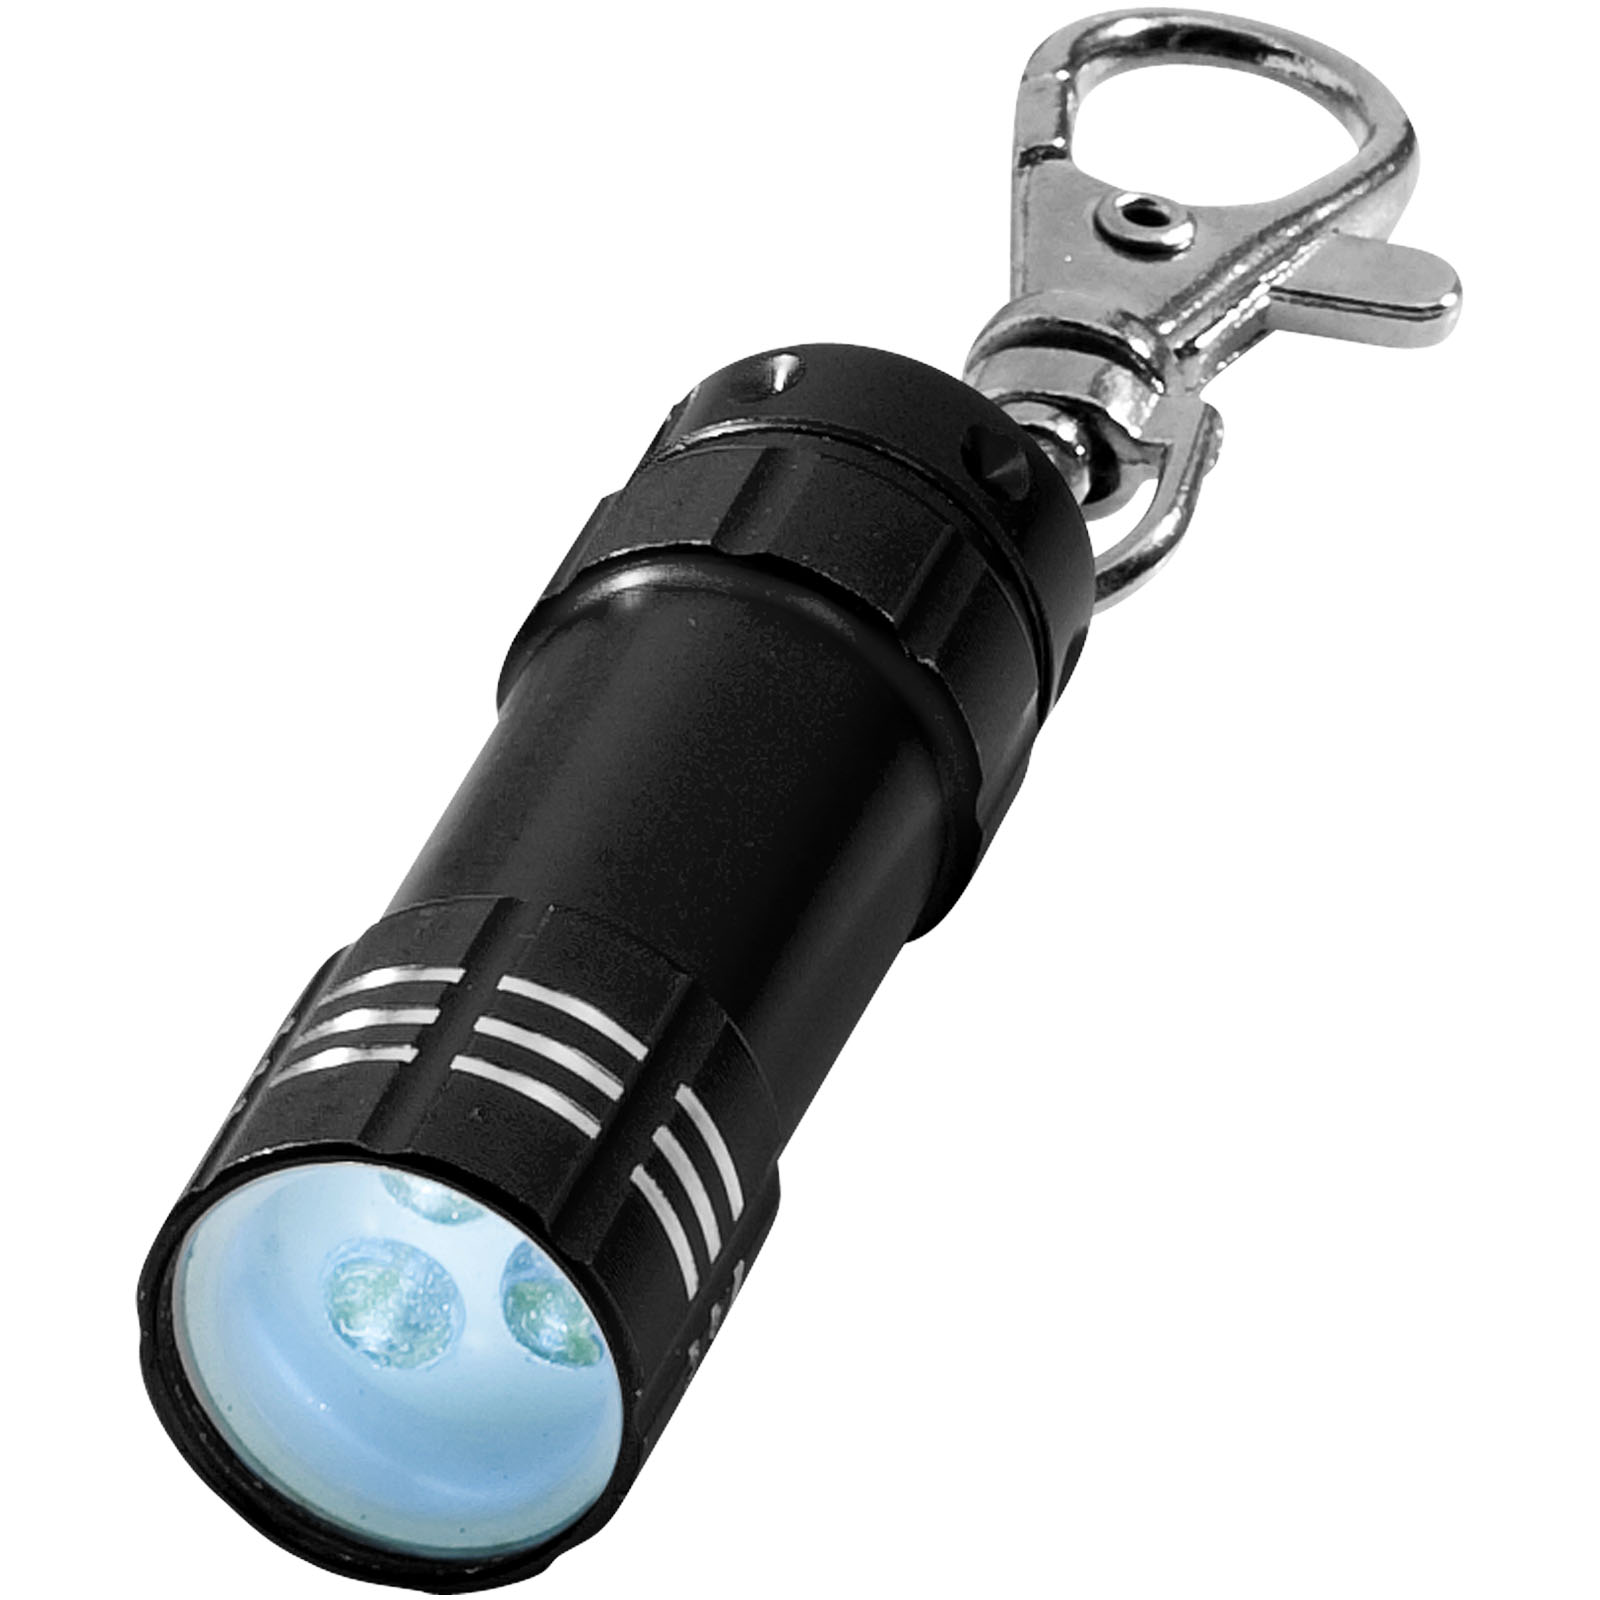 Lamps - Astro LED keychain light